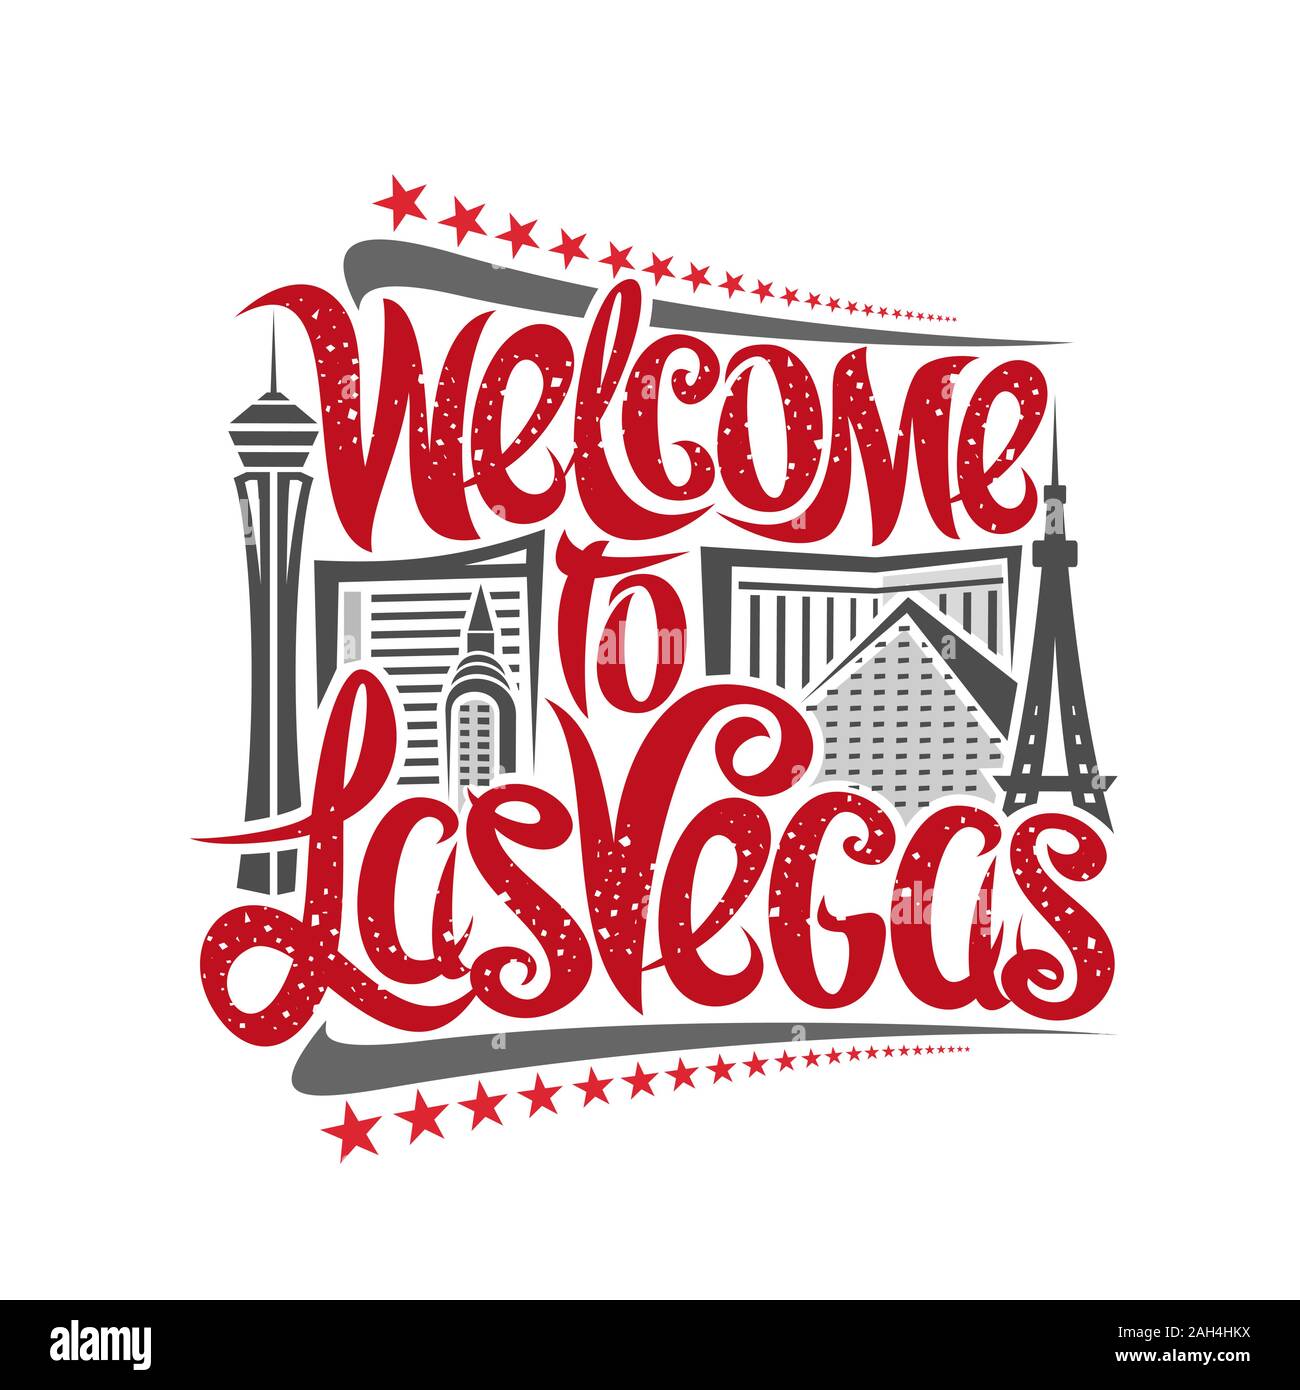 Vector poster for Las Vegas, decorative outline illustration with abstract architecture, elegant lettering - welcome to las vegas and red stars in a r Stock Vector